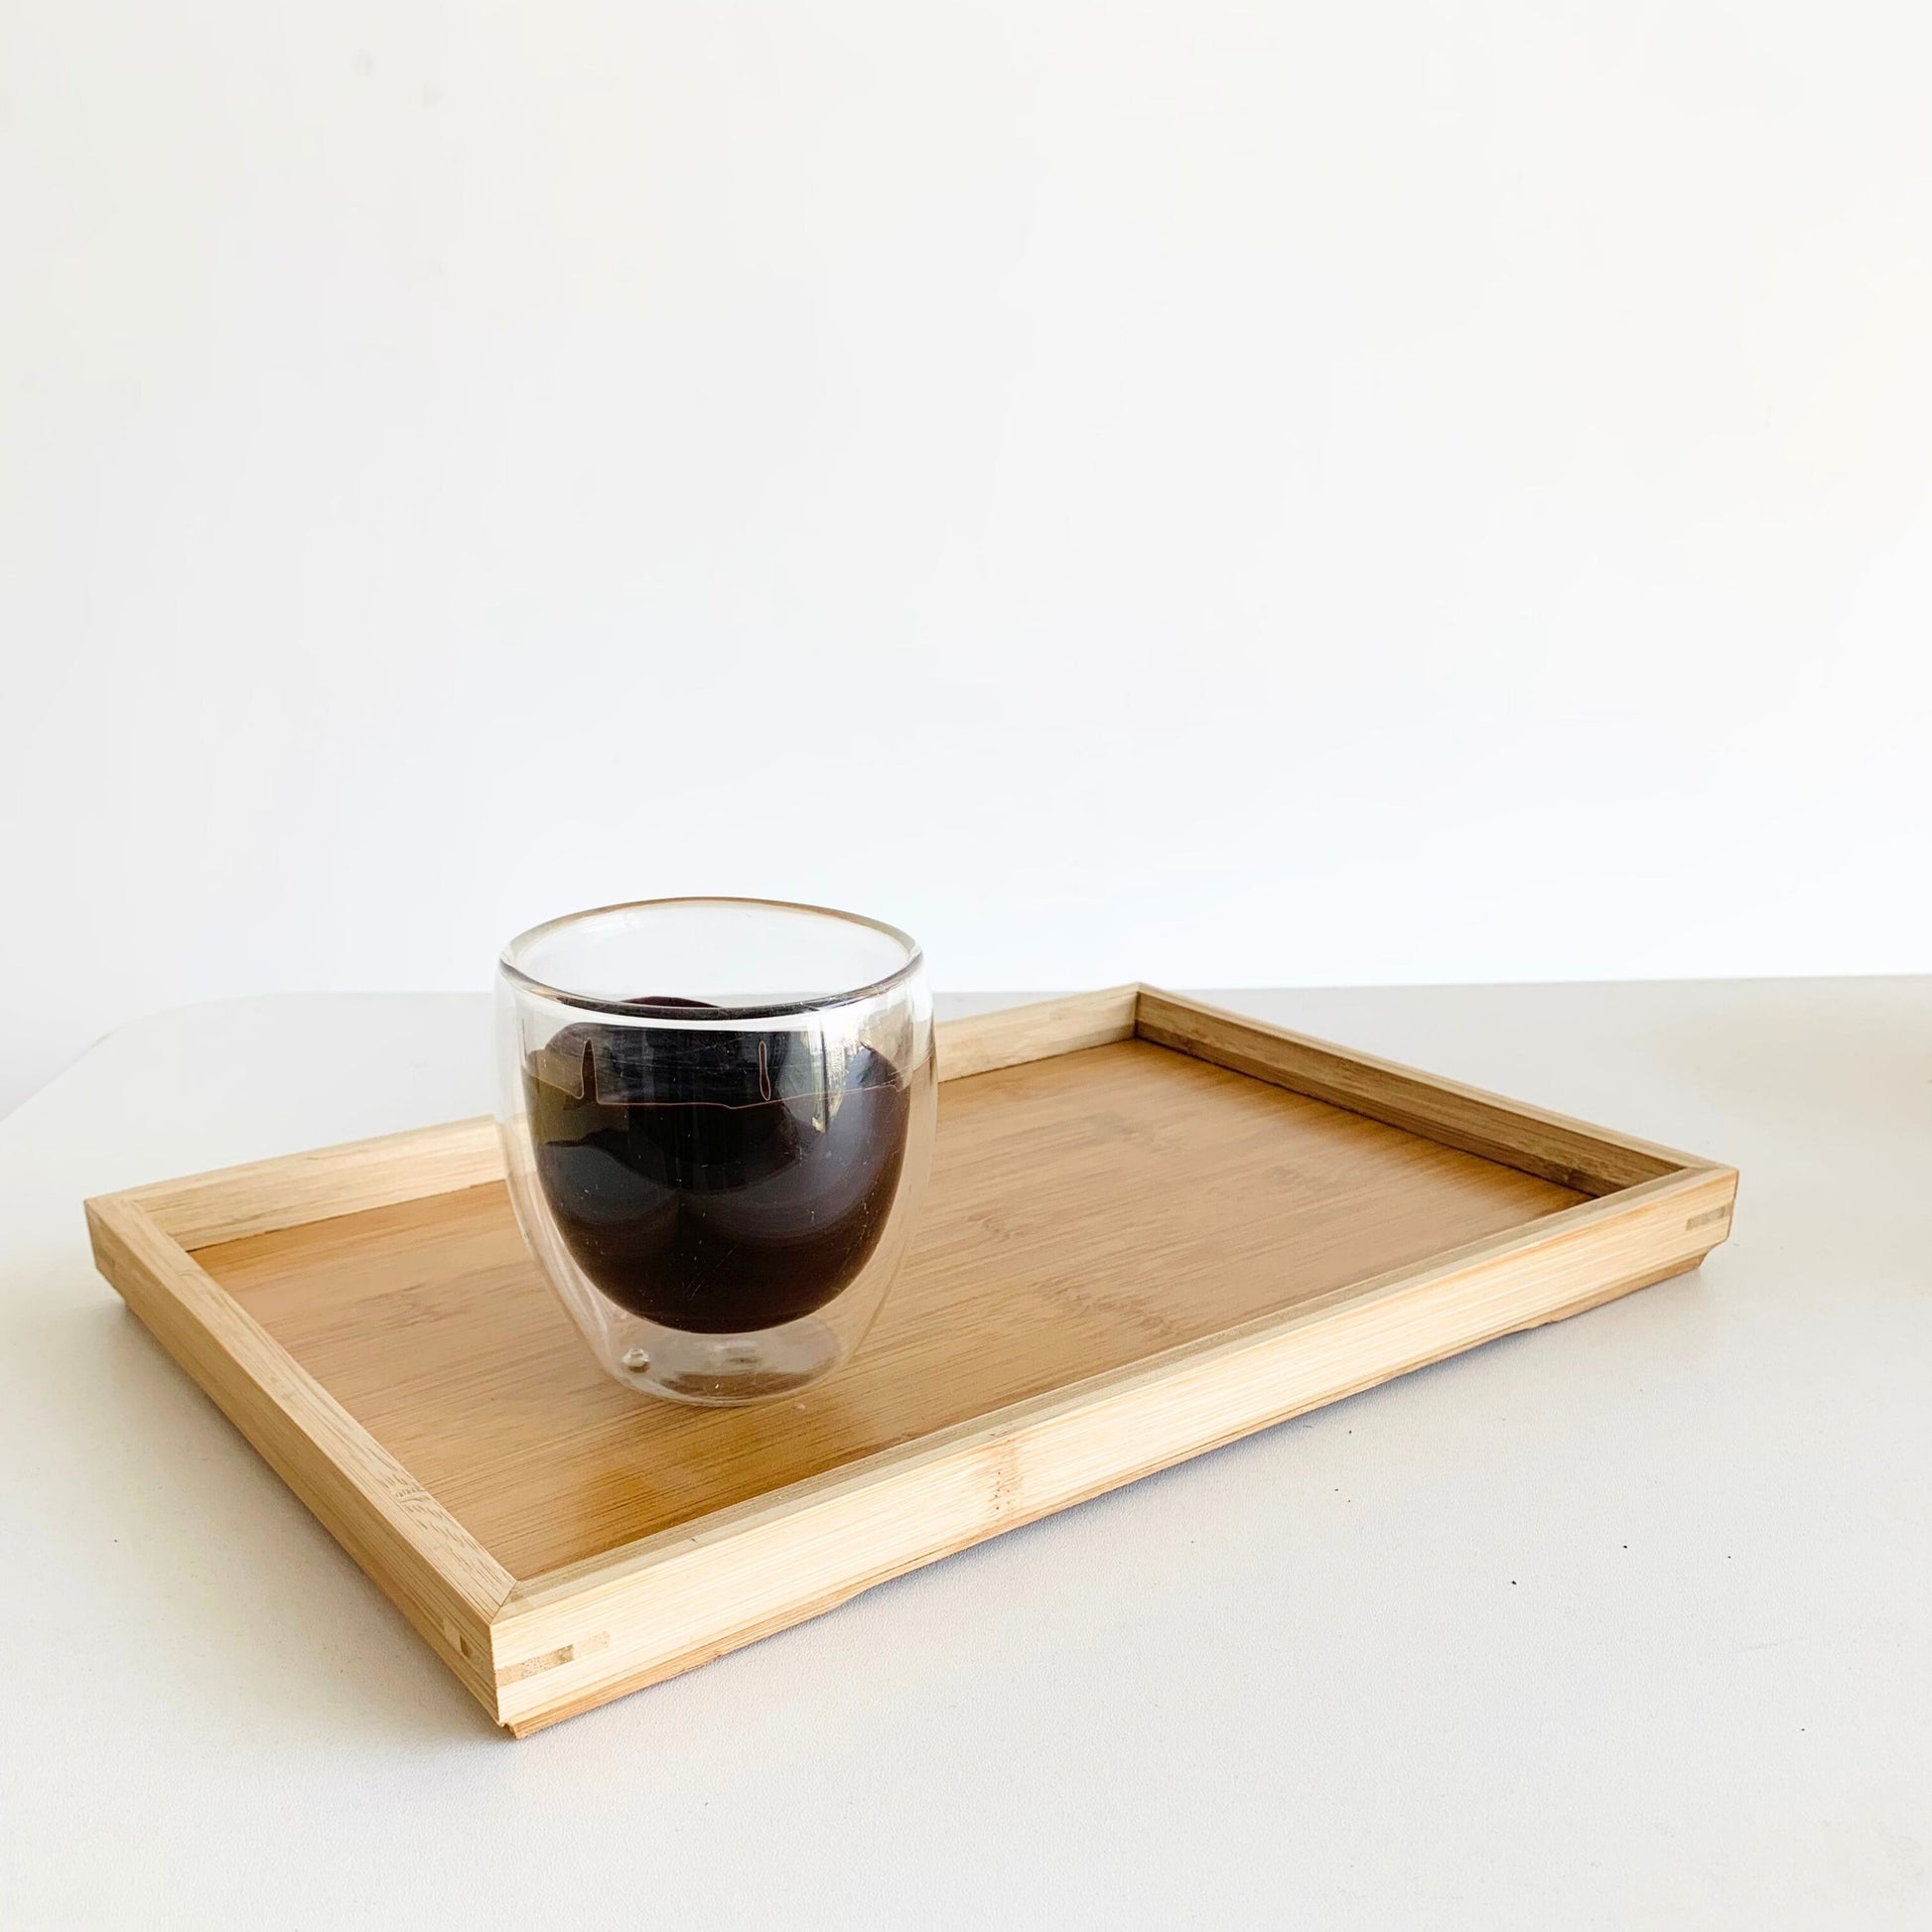 DAISYLIFE Natural and Eco-Friendly Bamboo Tea/ Coffee / Snacks / Food Serving Tray for guests or everyday use